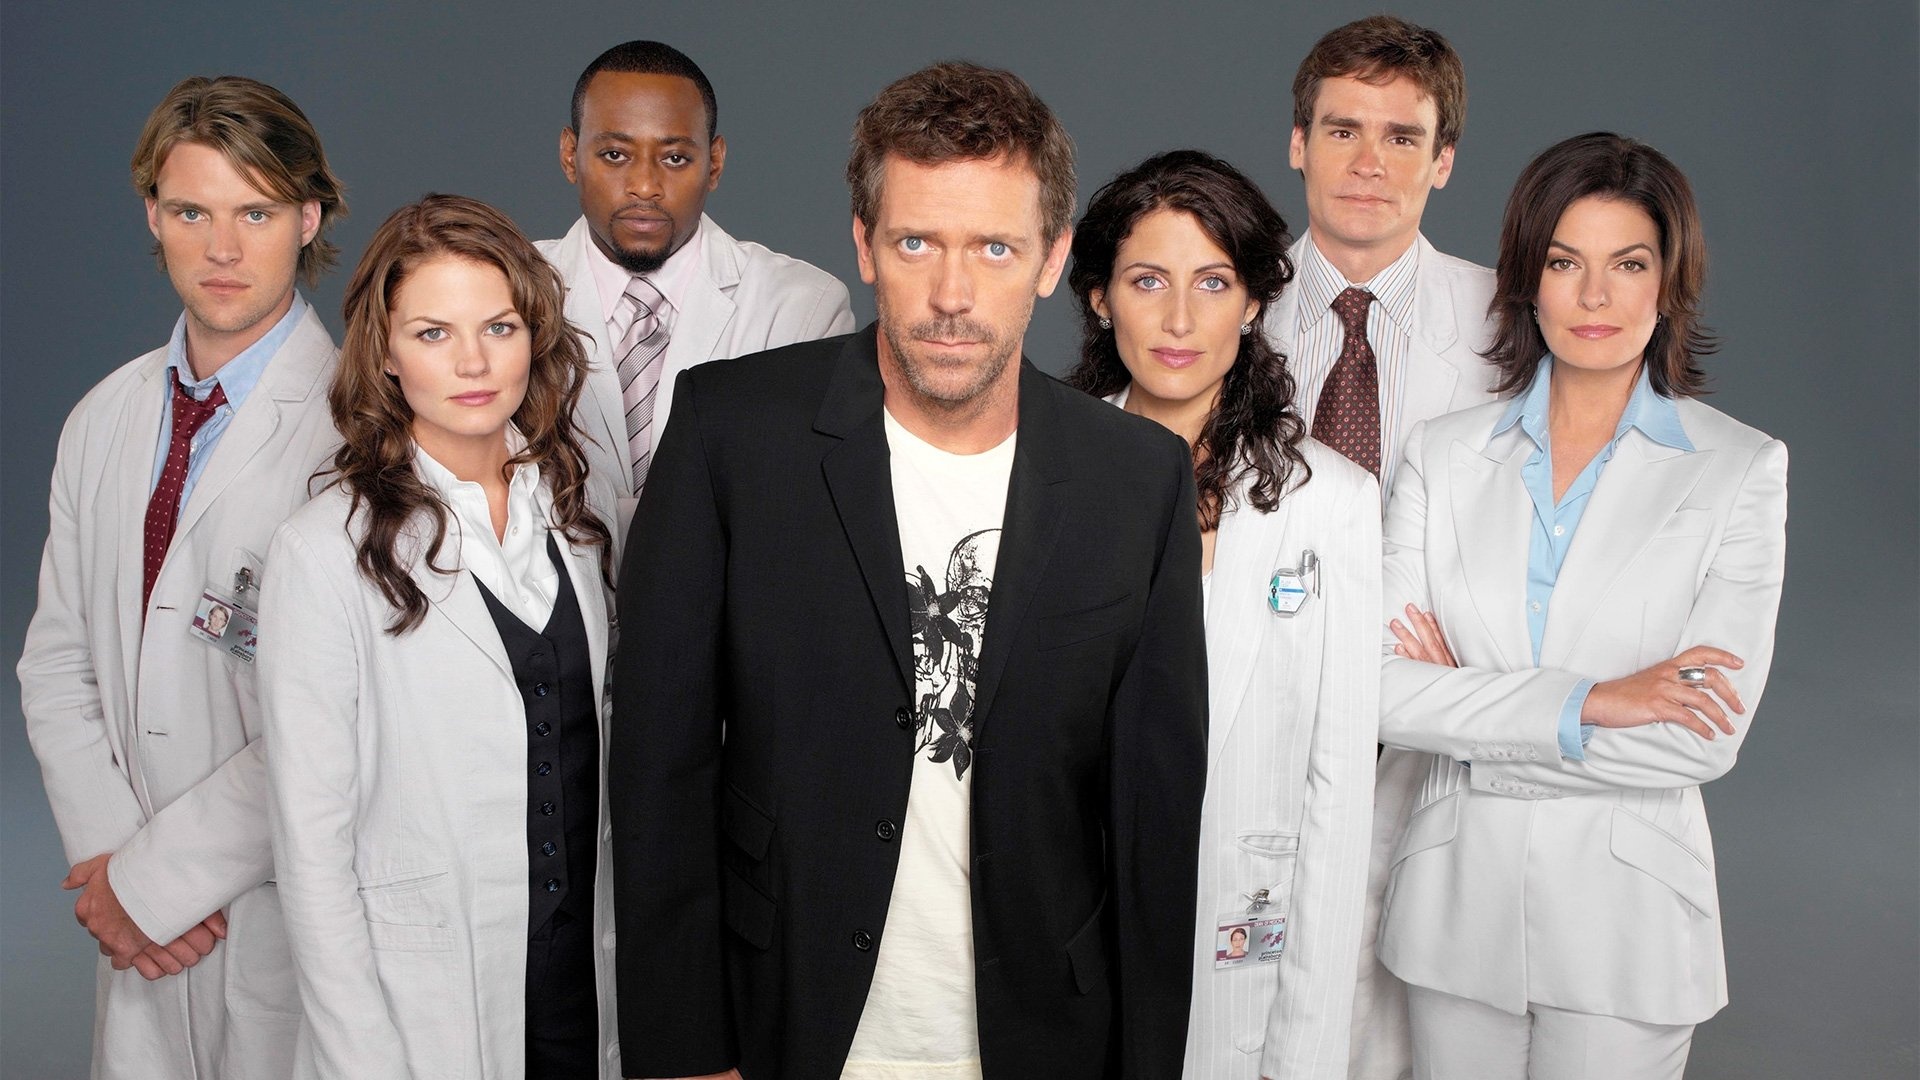 Dr. House: A team of diagnosticians, Princeton–Plainsboro Teaching Hospital, PPTH, New Jersey. 1920x1080 Full HD Wallpaper.